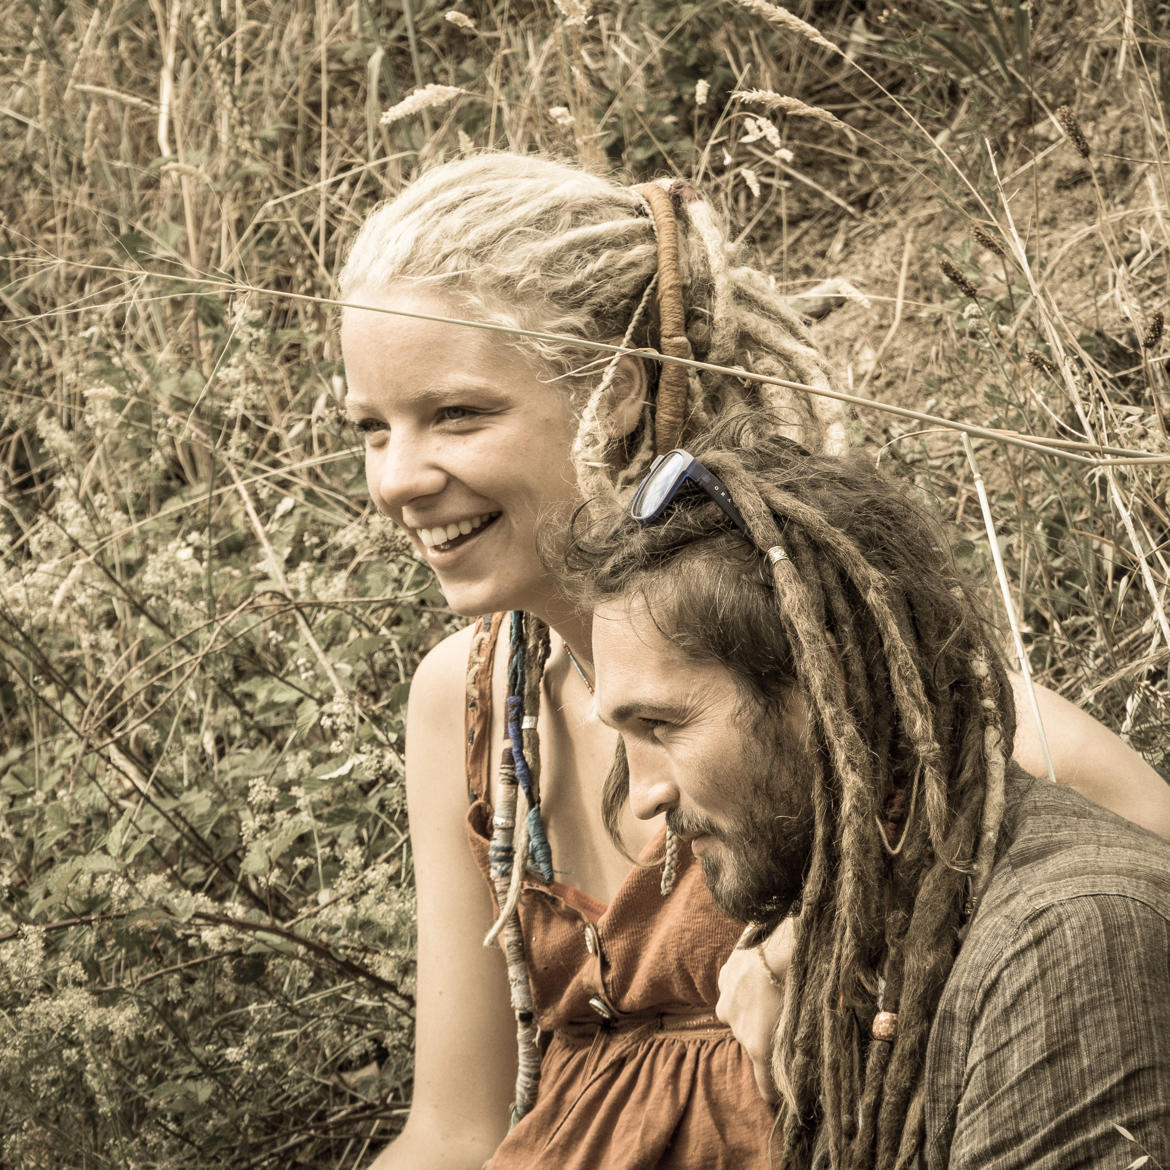 Love, dreads and nature